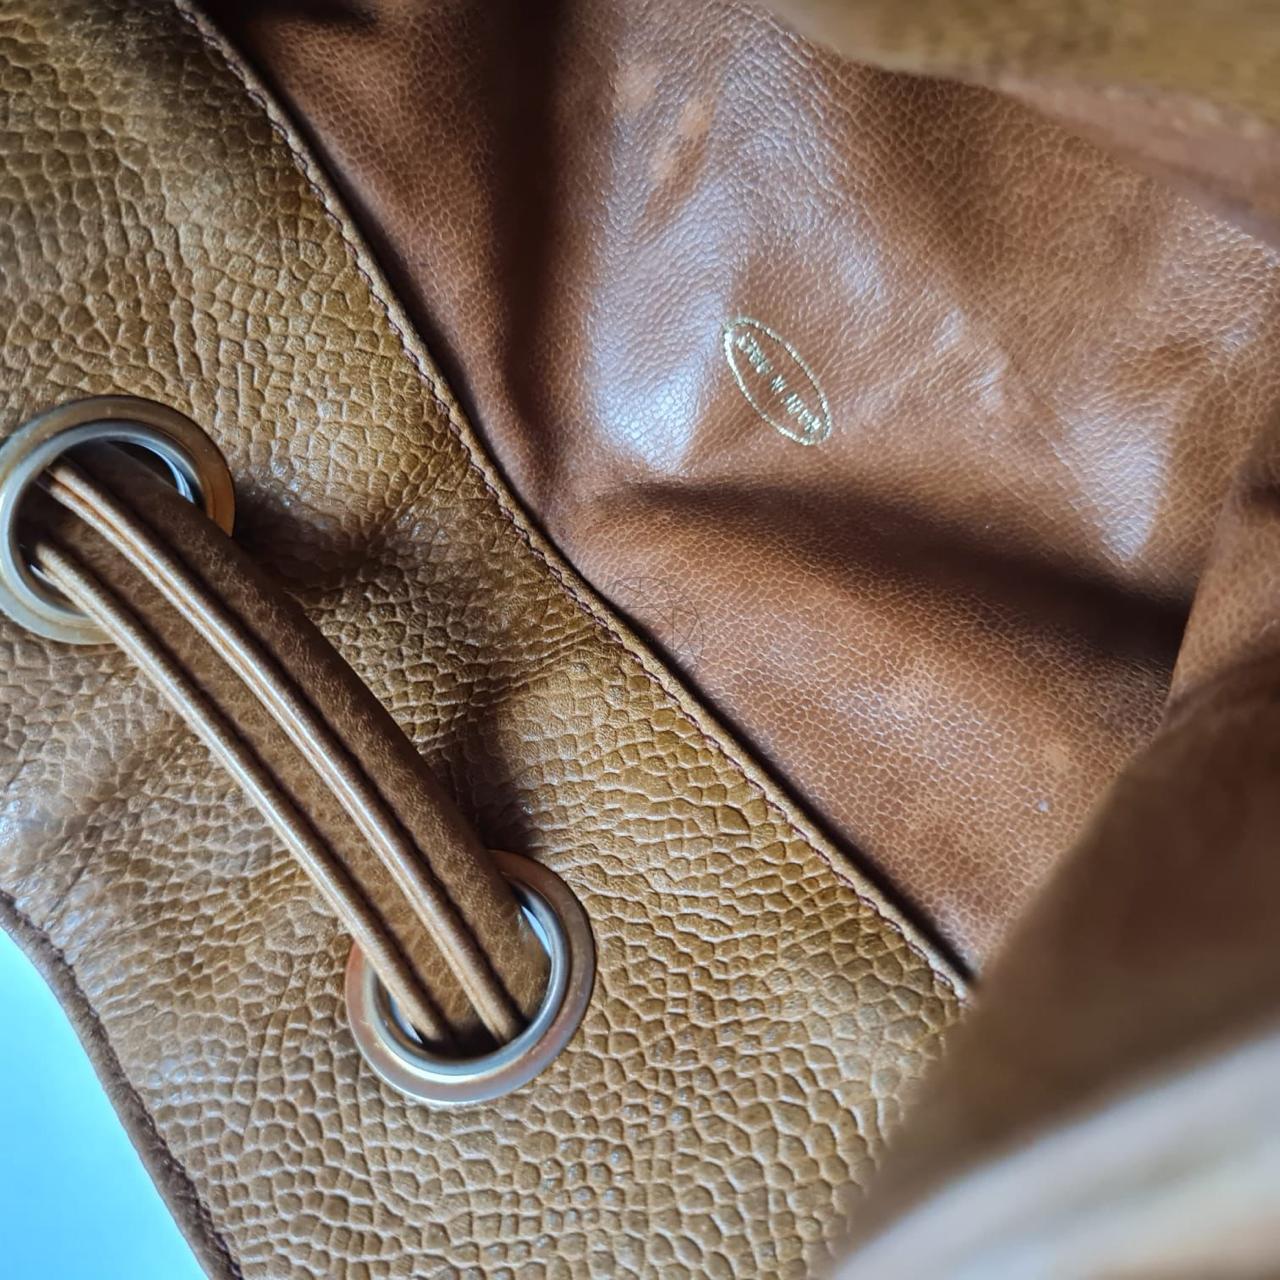 Vintage drawstring hobo bag from the 90s in brown caviar leather. Item is in fair condition. Visible tiny pen mark on the exterior leather. Leather has slightly discolored. Visible water marks on the lining. Holo still intact, series #2. Comes as it